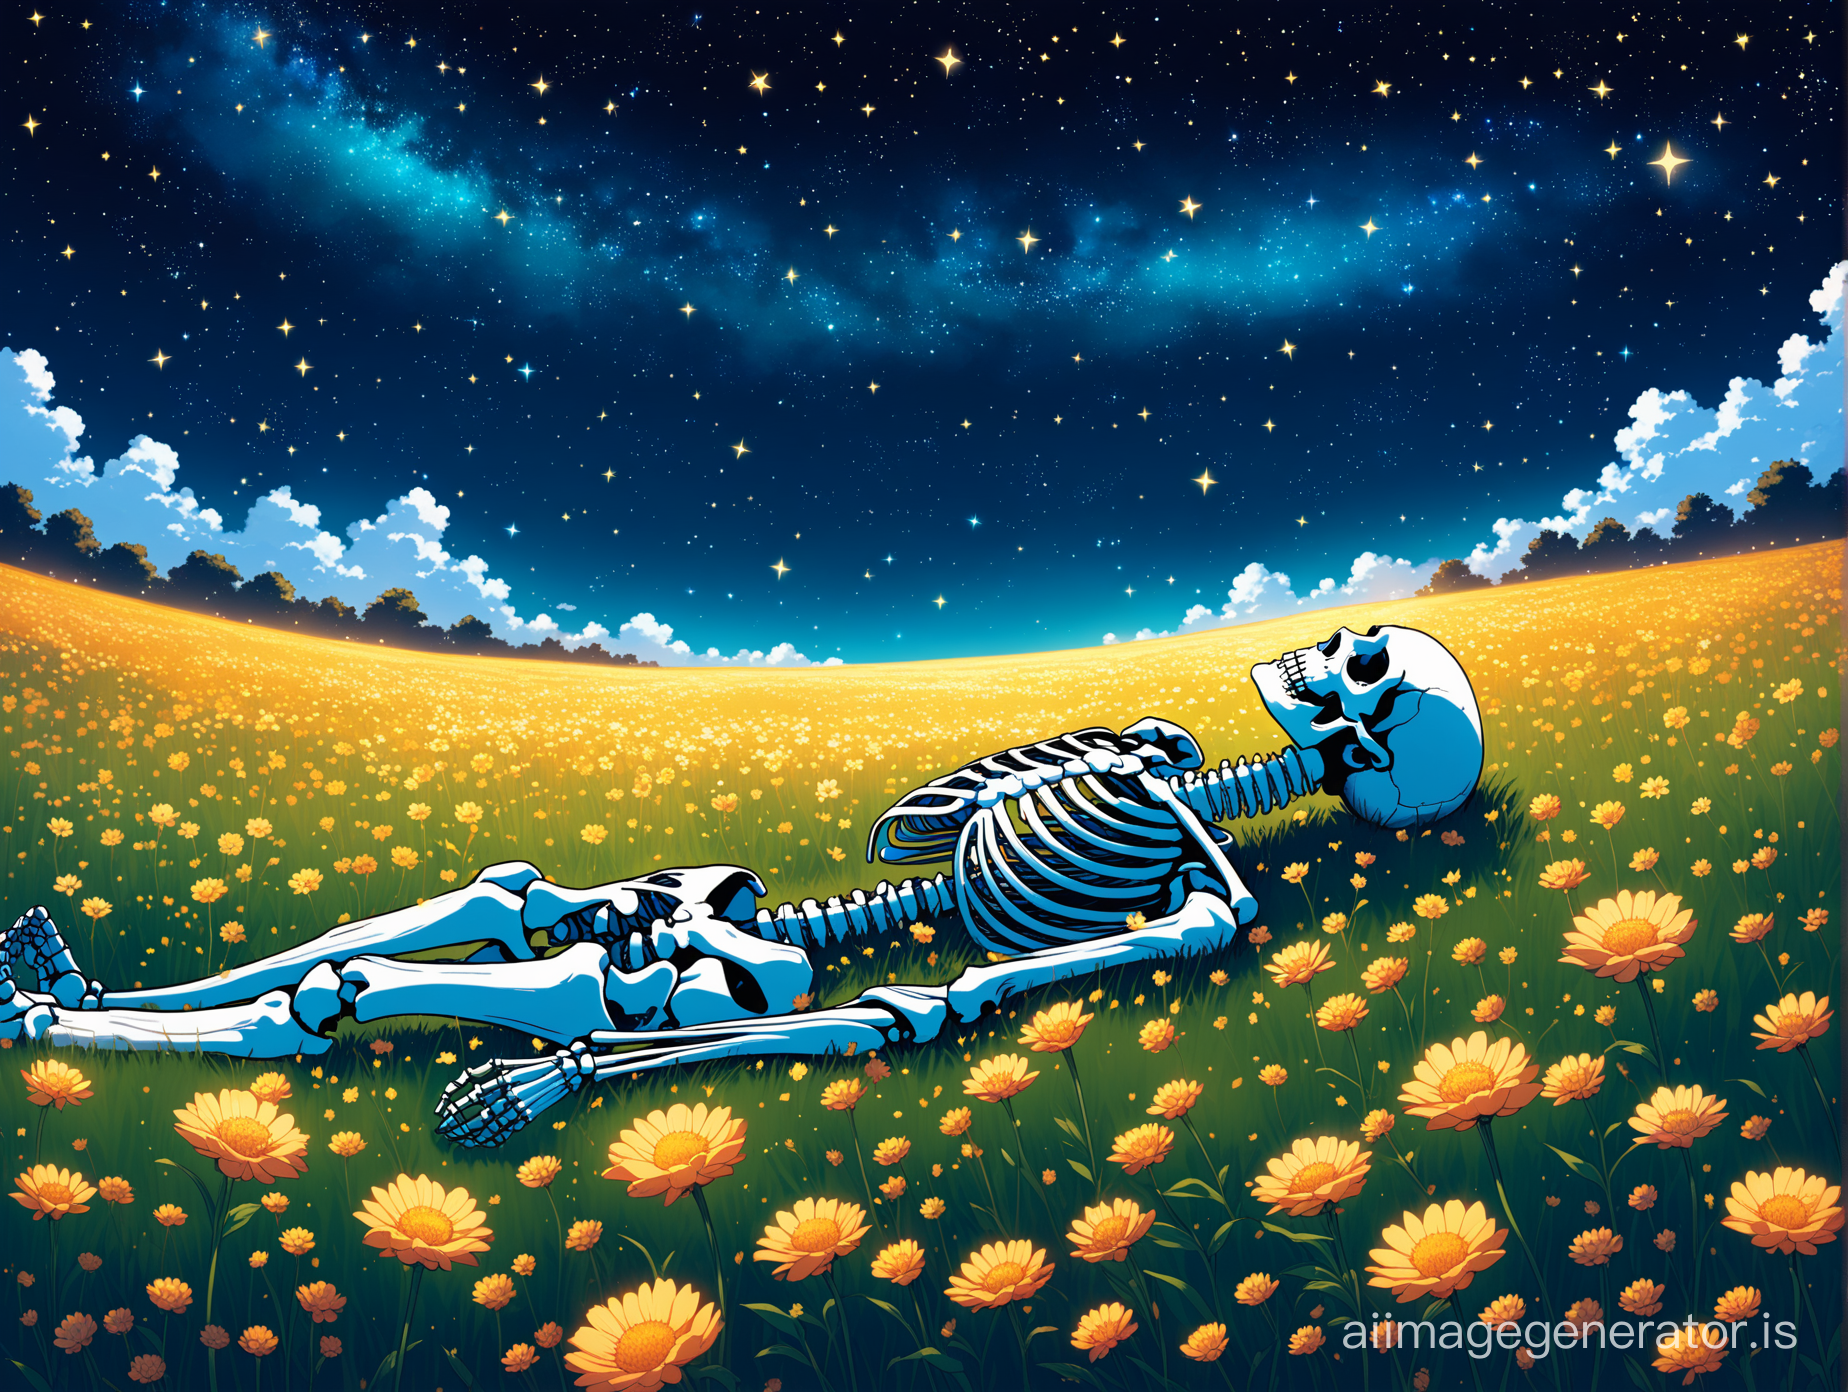 a skeleton man sleeping in a field full of flowers looking at the sky full of stars